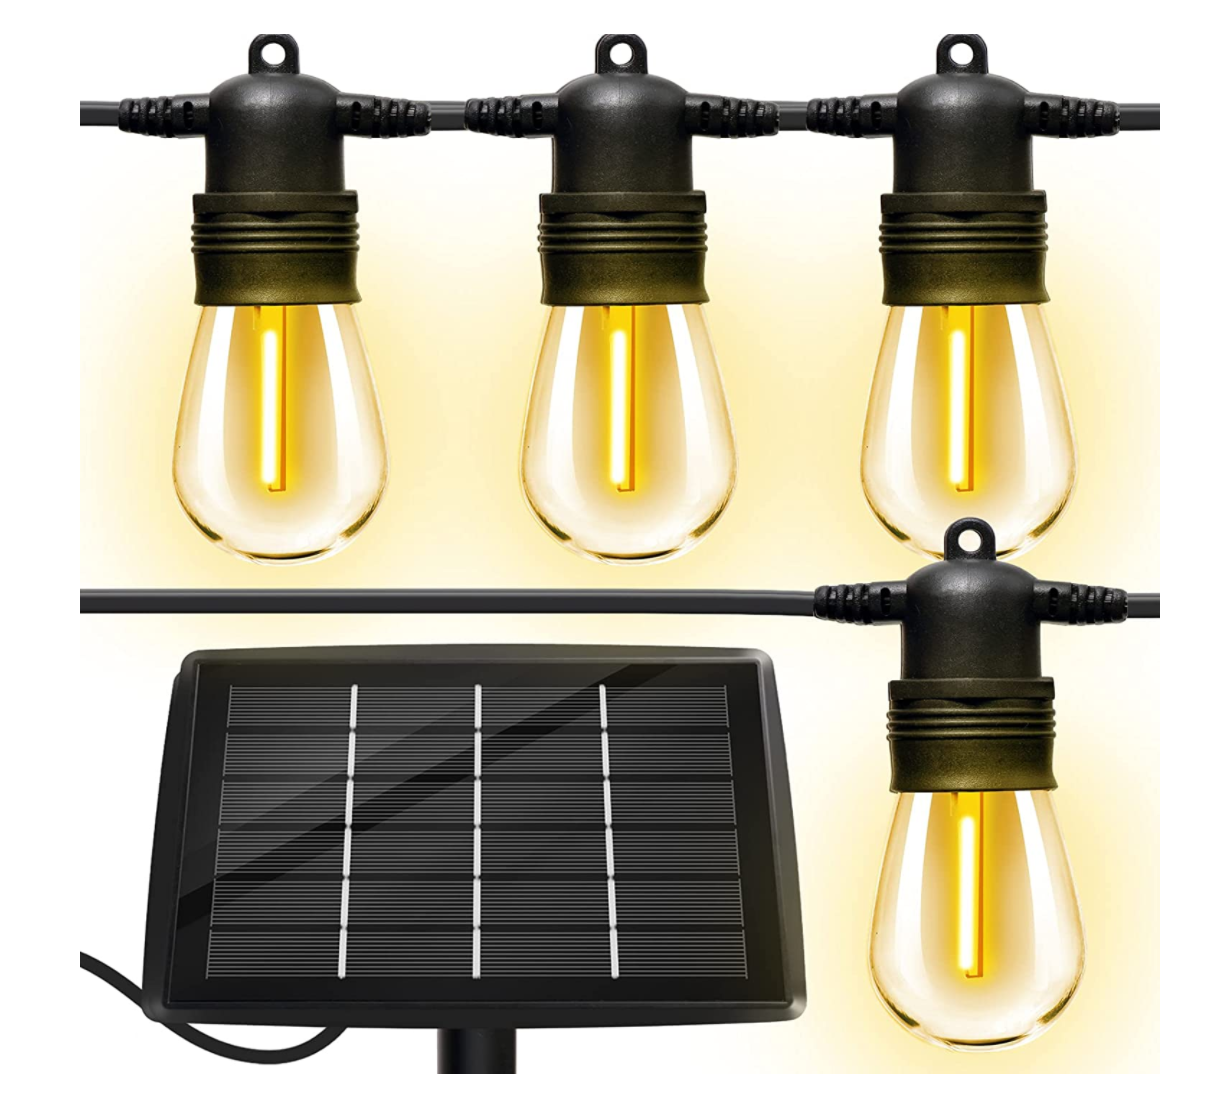 Baxstel Solar Outdoor String Lights with 15pcs Shatterproof Bulbs Review